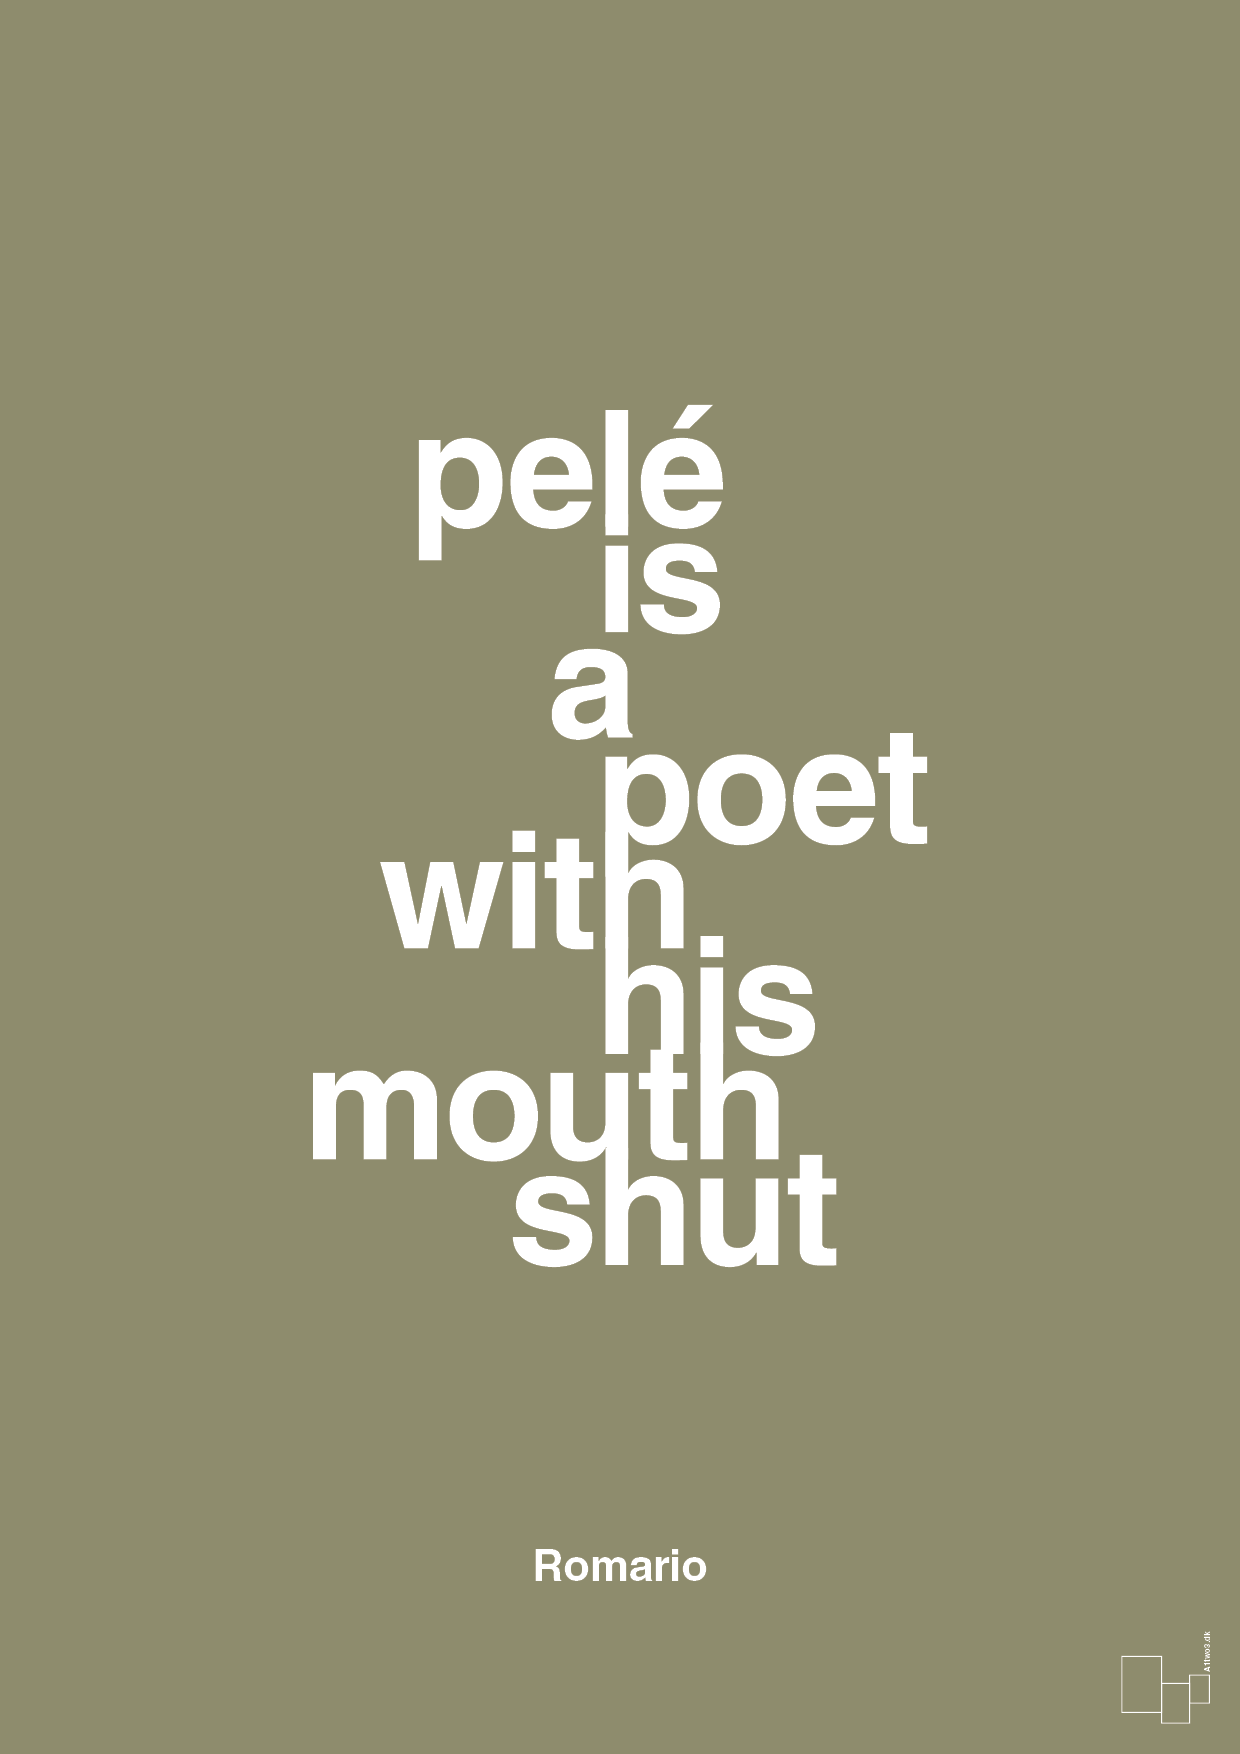 pelé is a poet with his mouth shut - Plakat med Citater i Misty Forrest